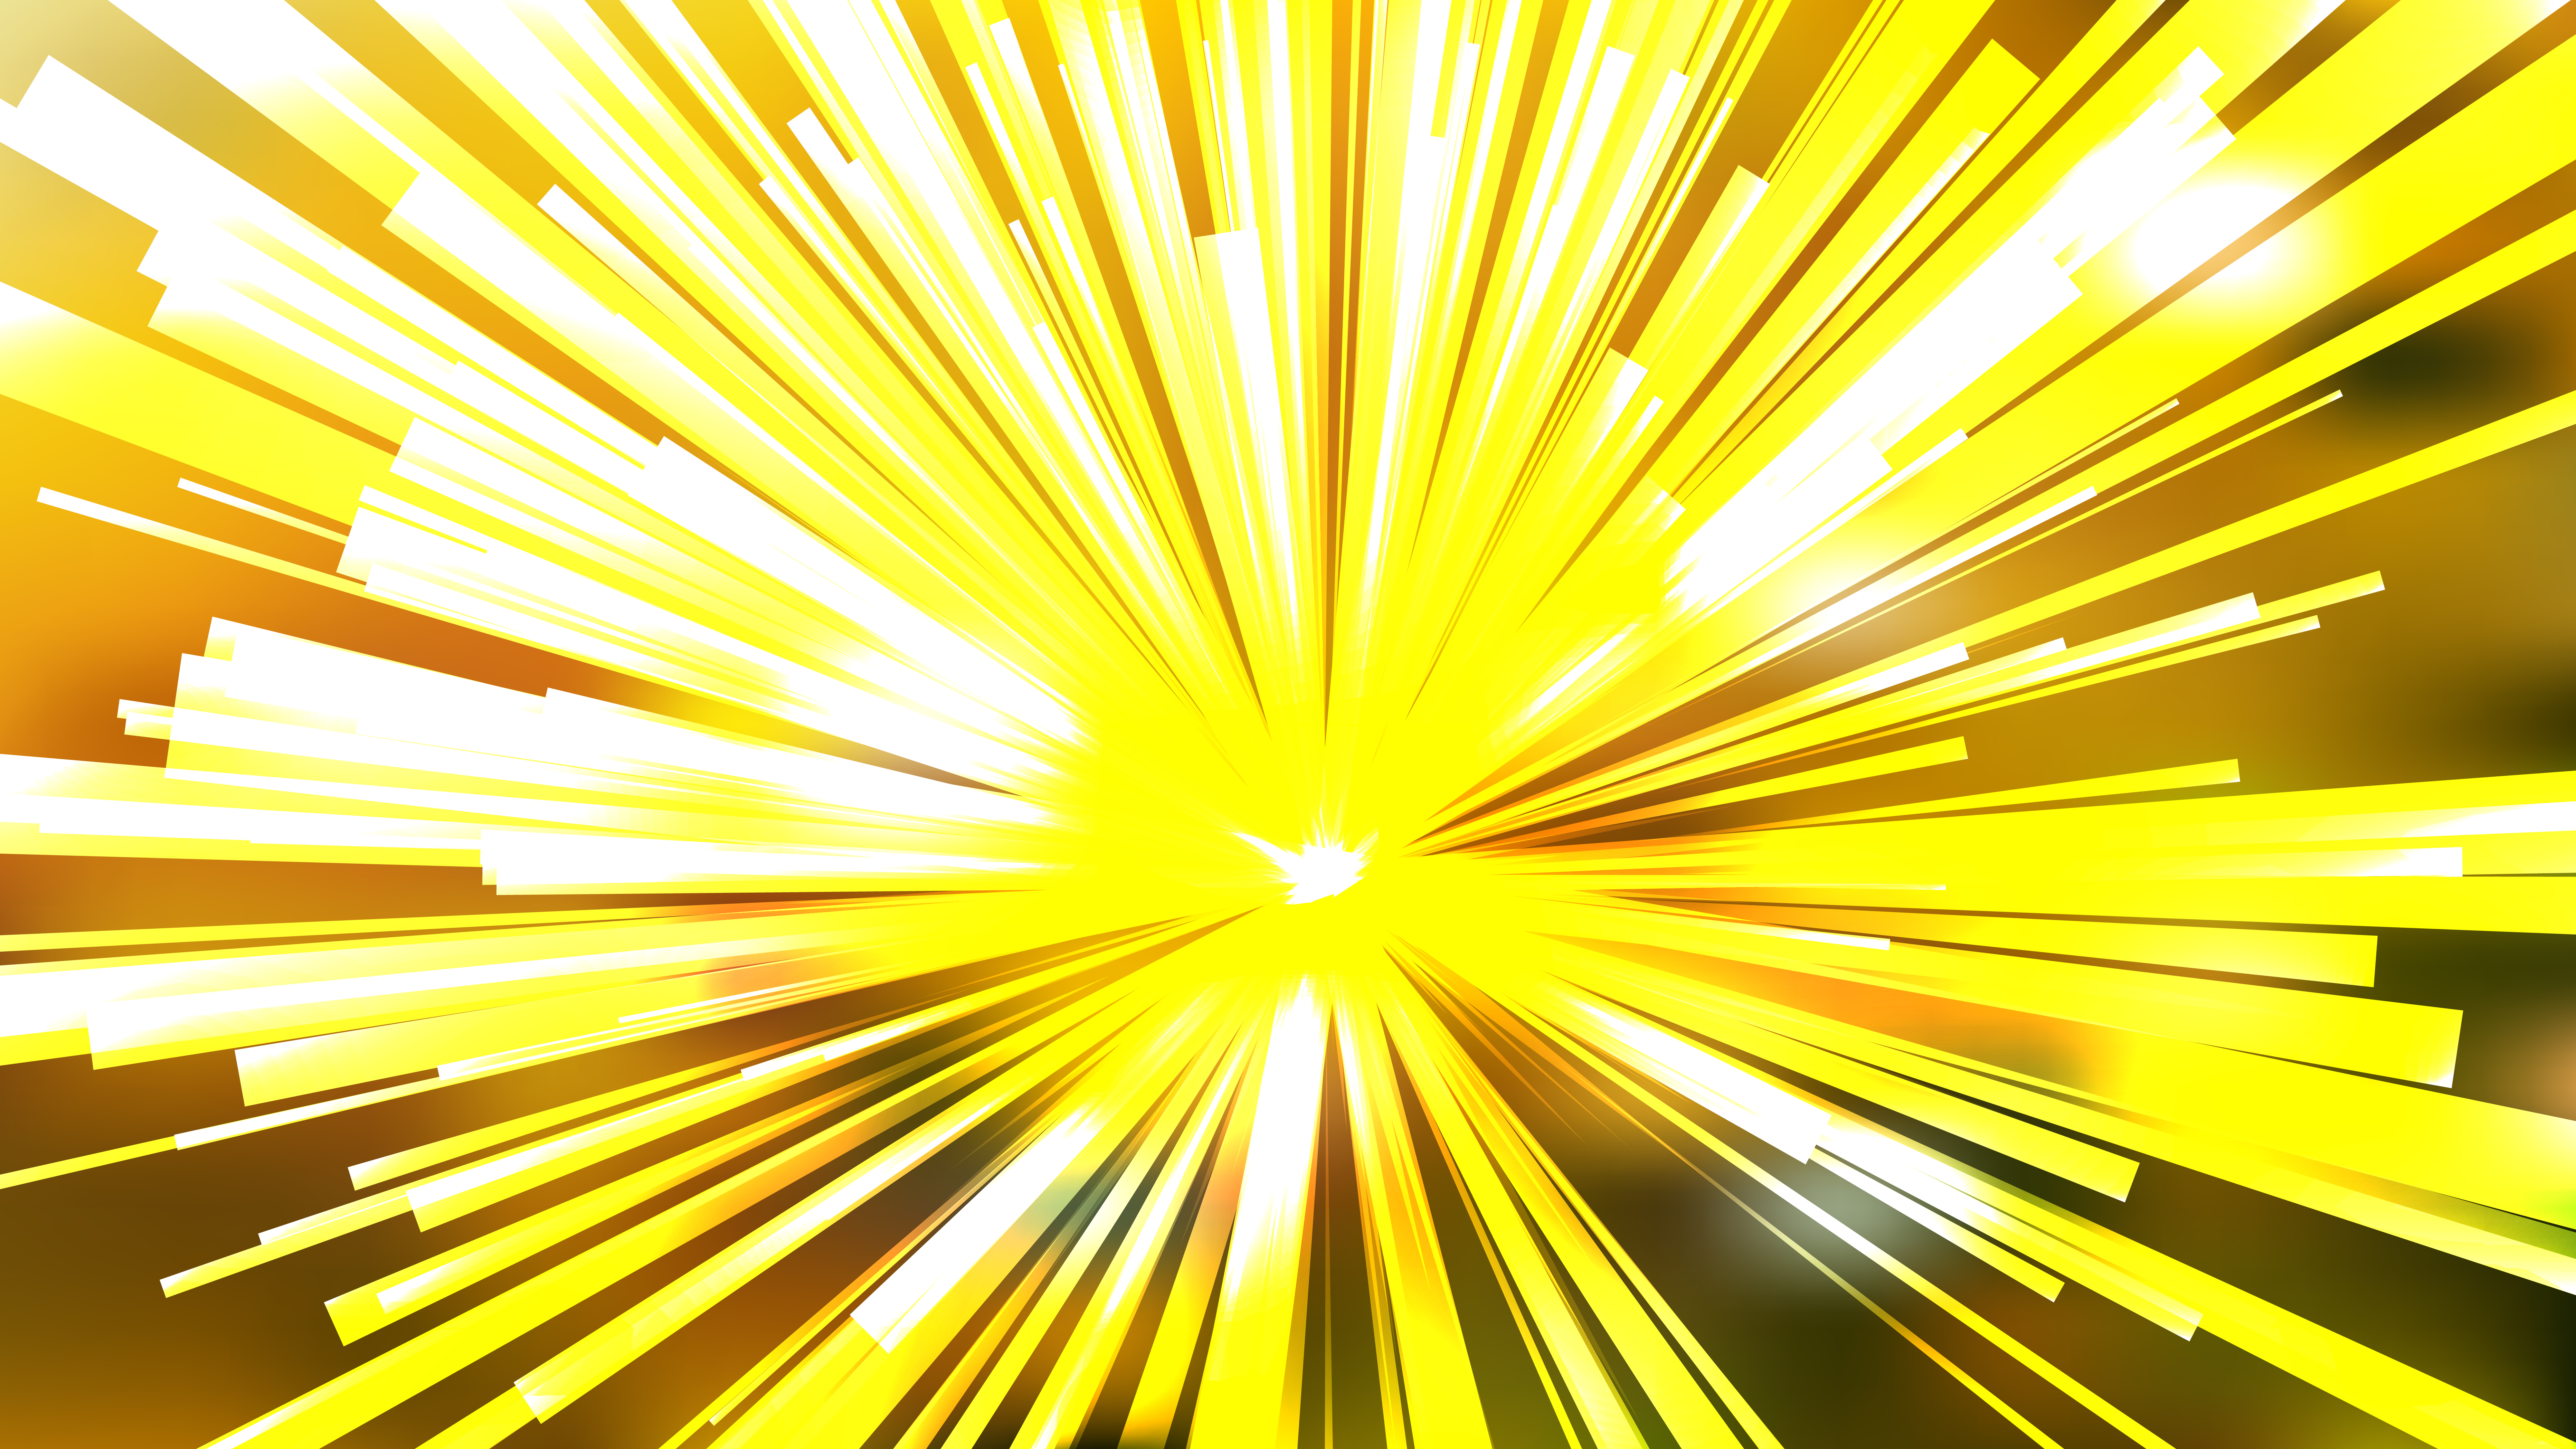 Free Abstract Yellow And White Radial Sunburst Background Template